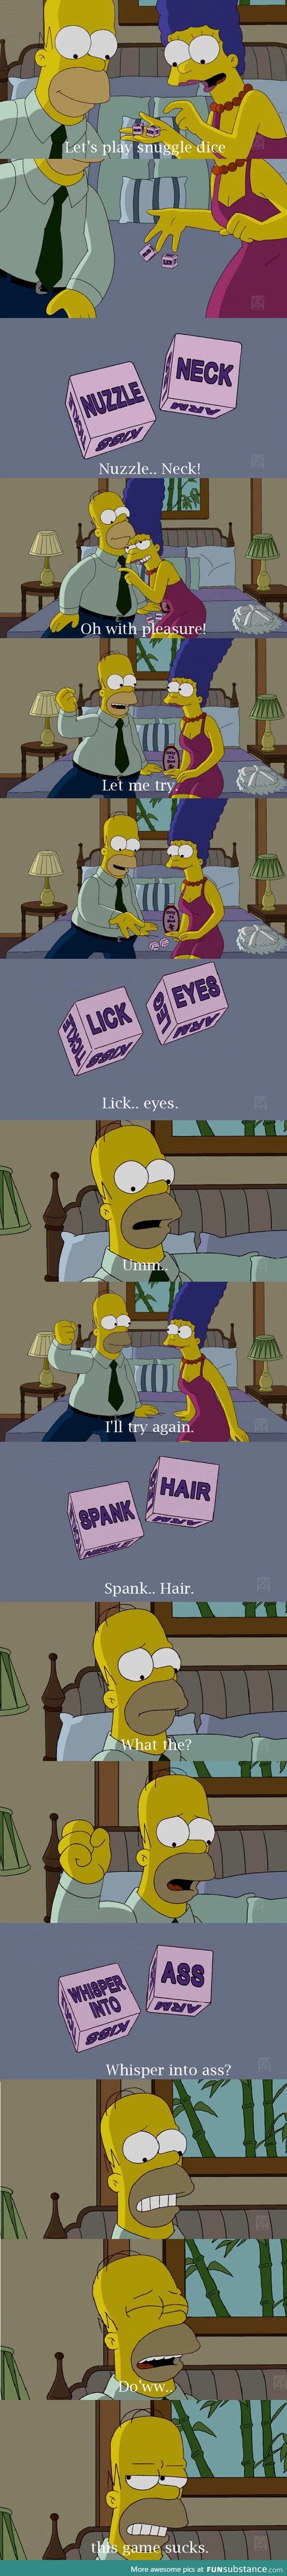 Homer and Marge's sexy time